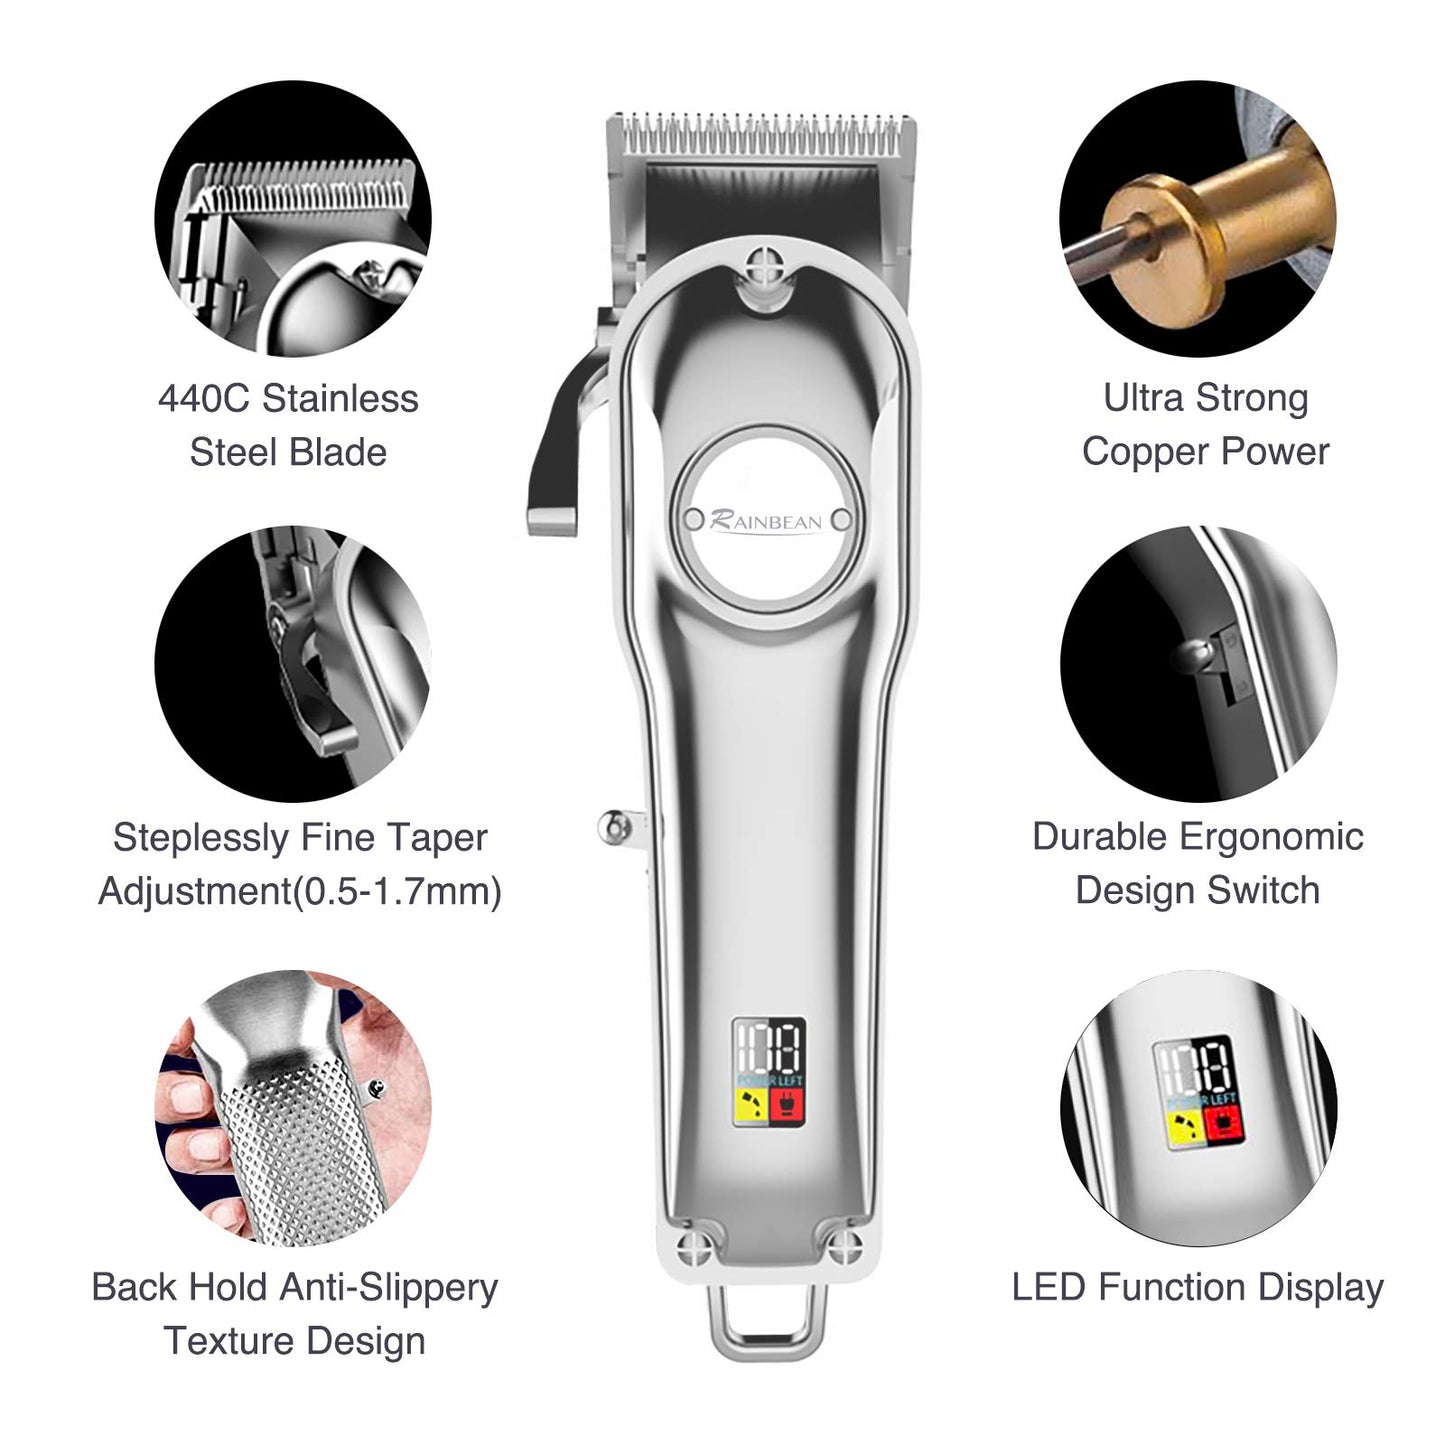 3-in-1 Men's Hair Trimmer: IPX7 Waterproof Beard Trimmer Grooming Kit with Cordless Hair Clipper for Women & Children. Features LED Display and USB Rechargeable